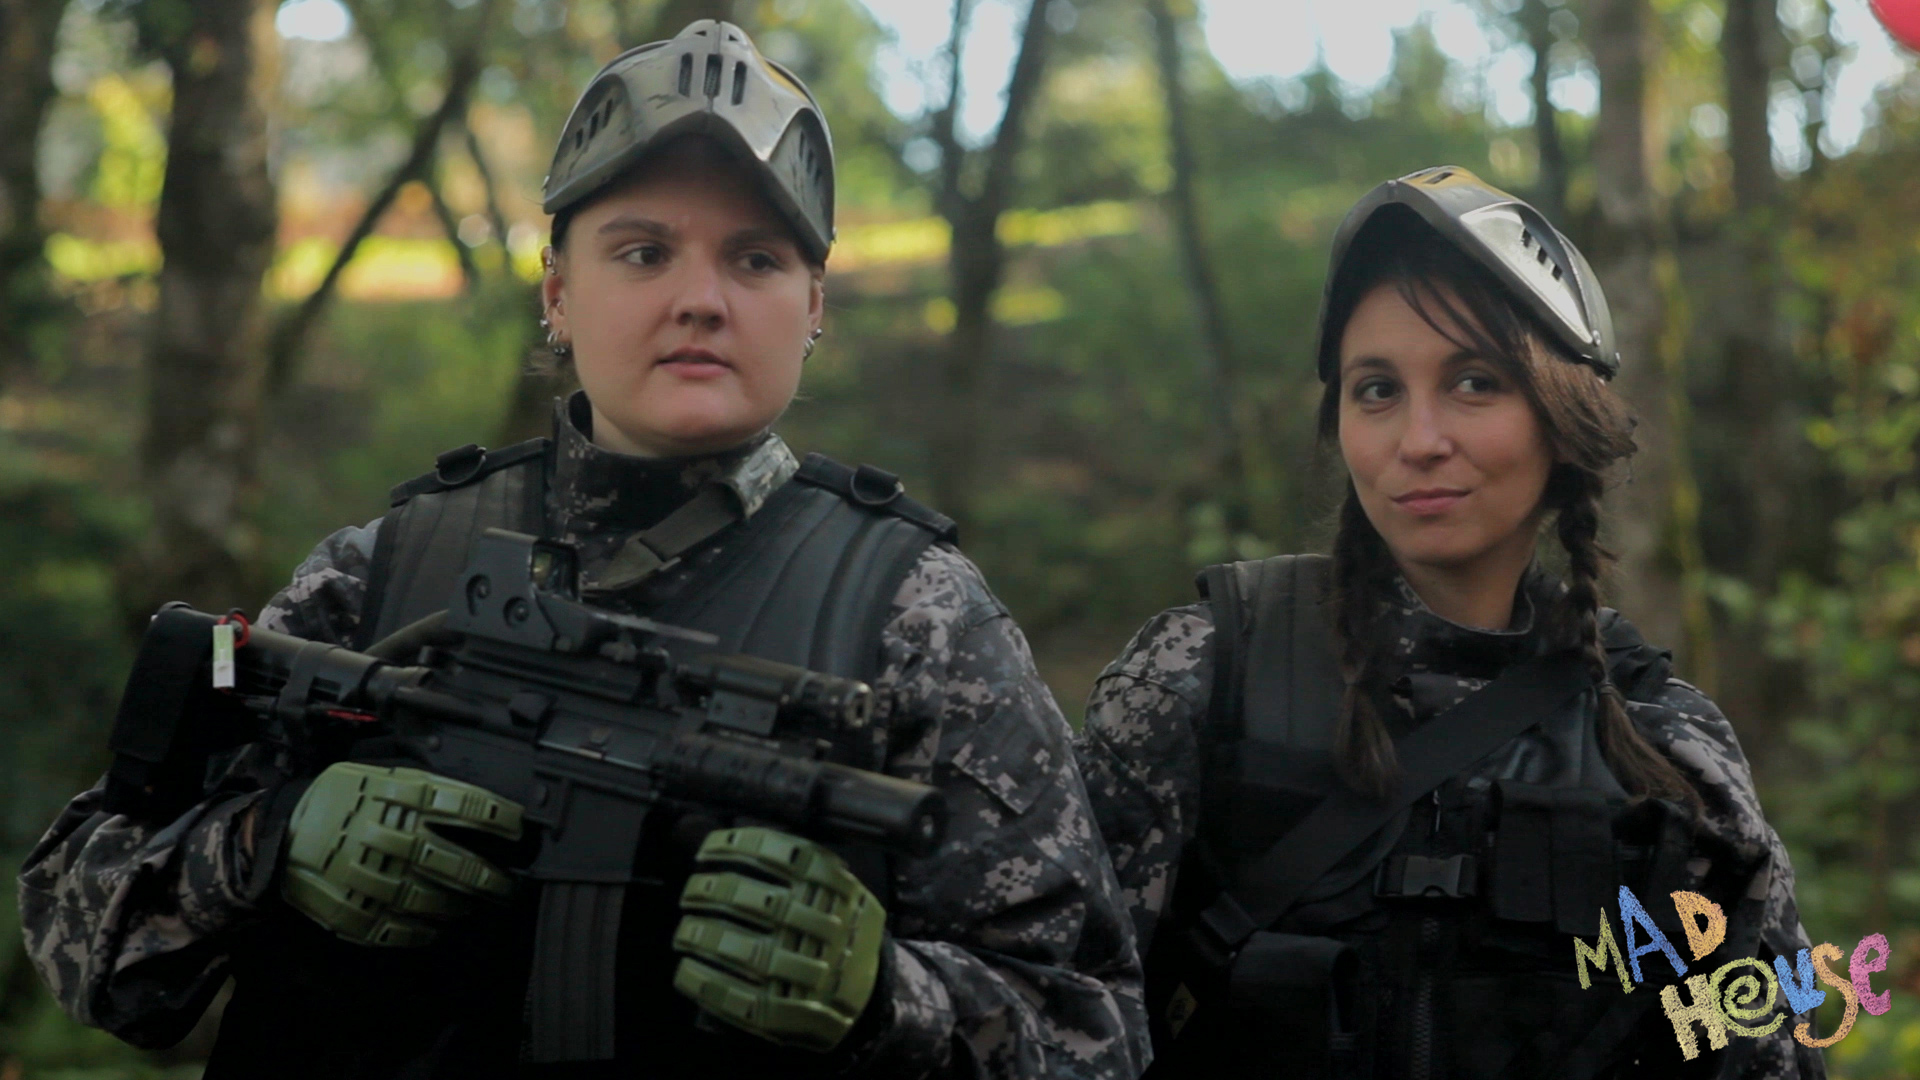 Candice and Taylor are ready to kill it at airsoft.